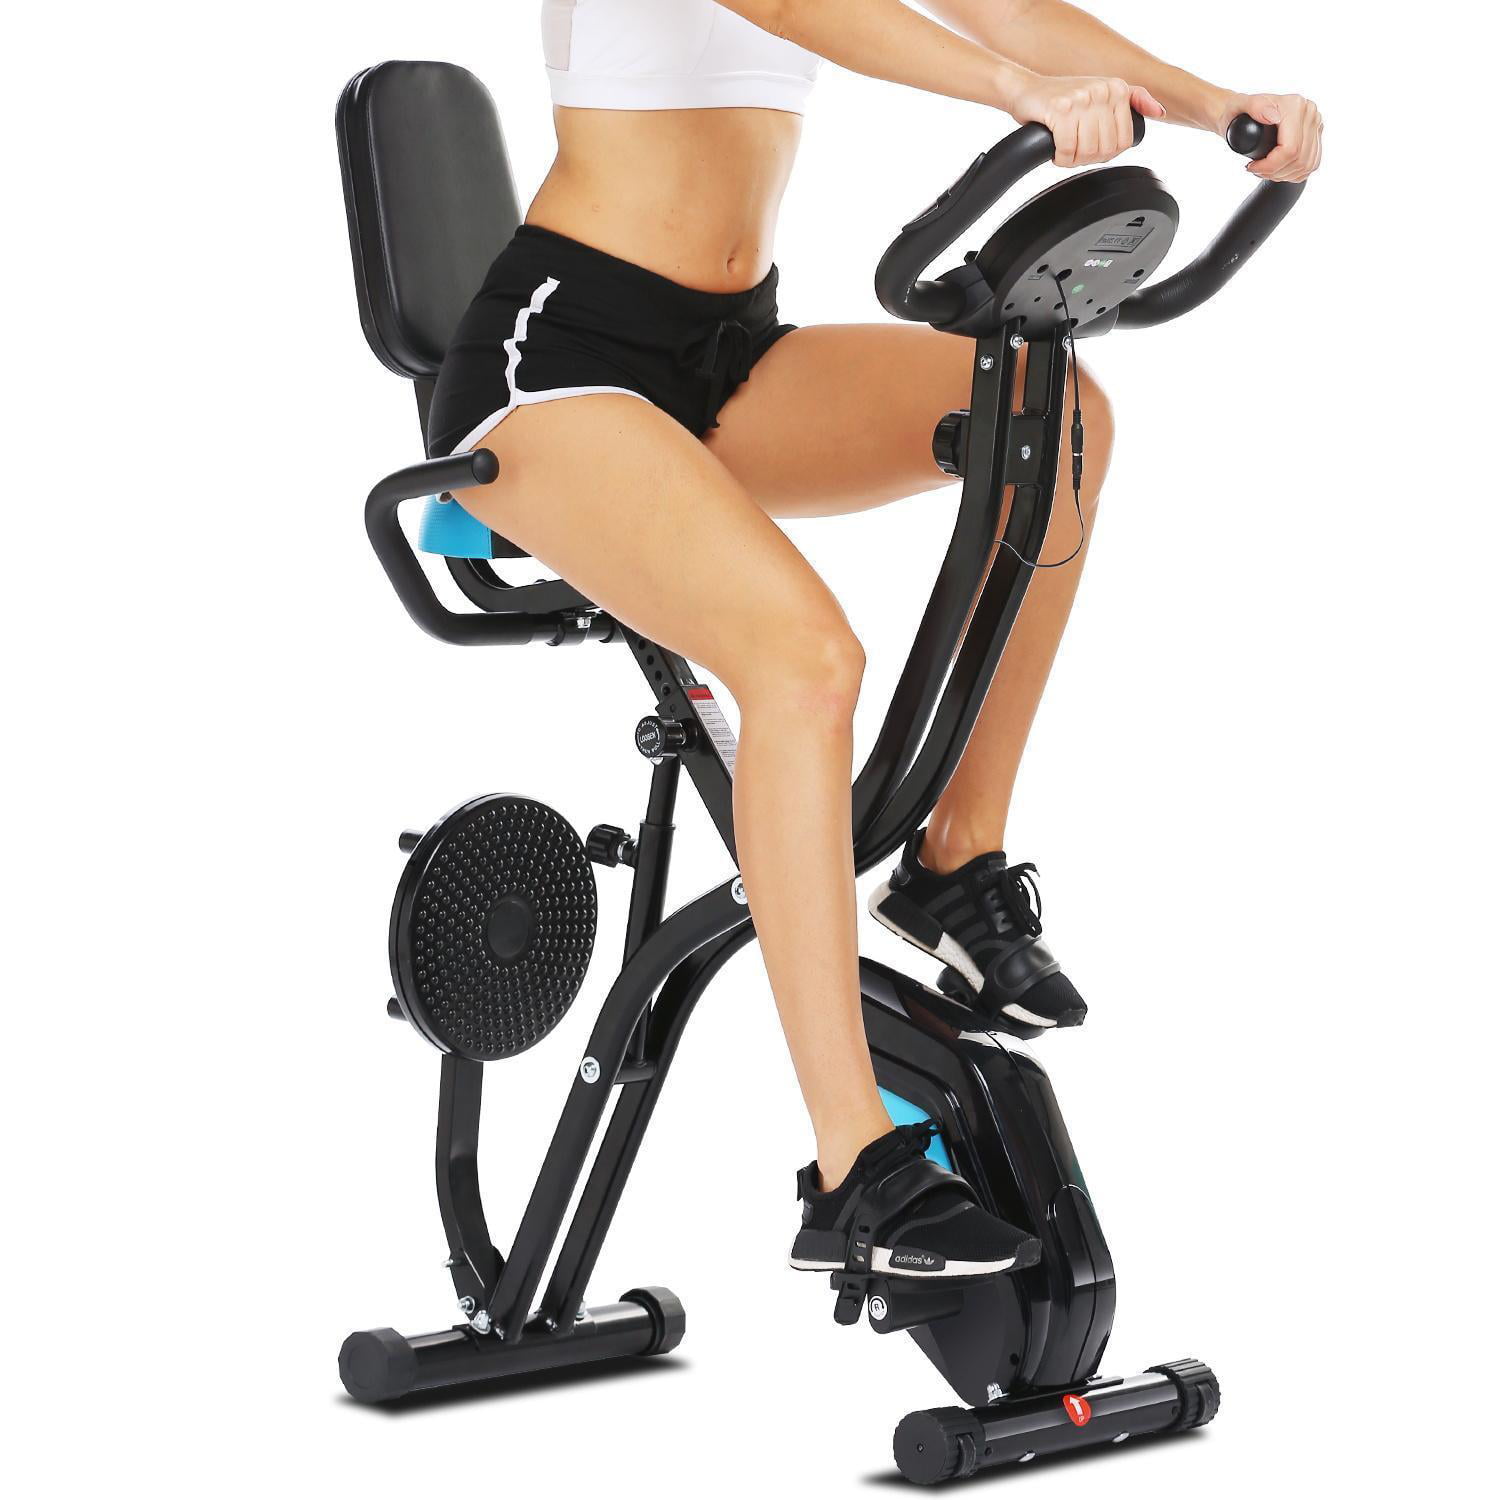 Details about   Pro Indoor Exercise Bike Stationary Cycling Bicycle Cardio Fitness Workout US 